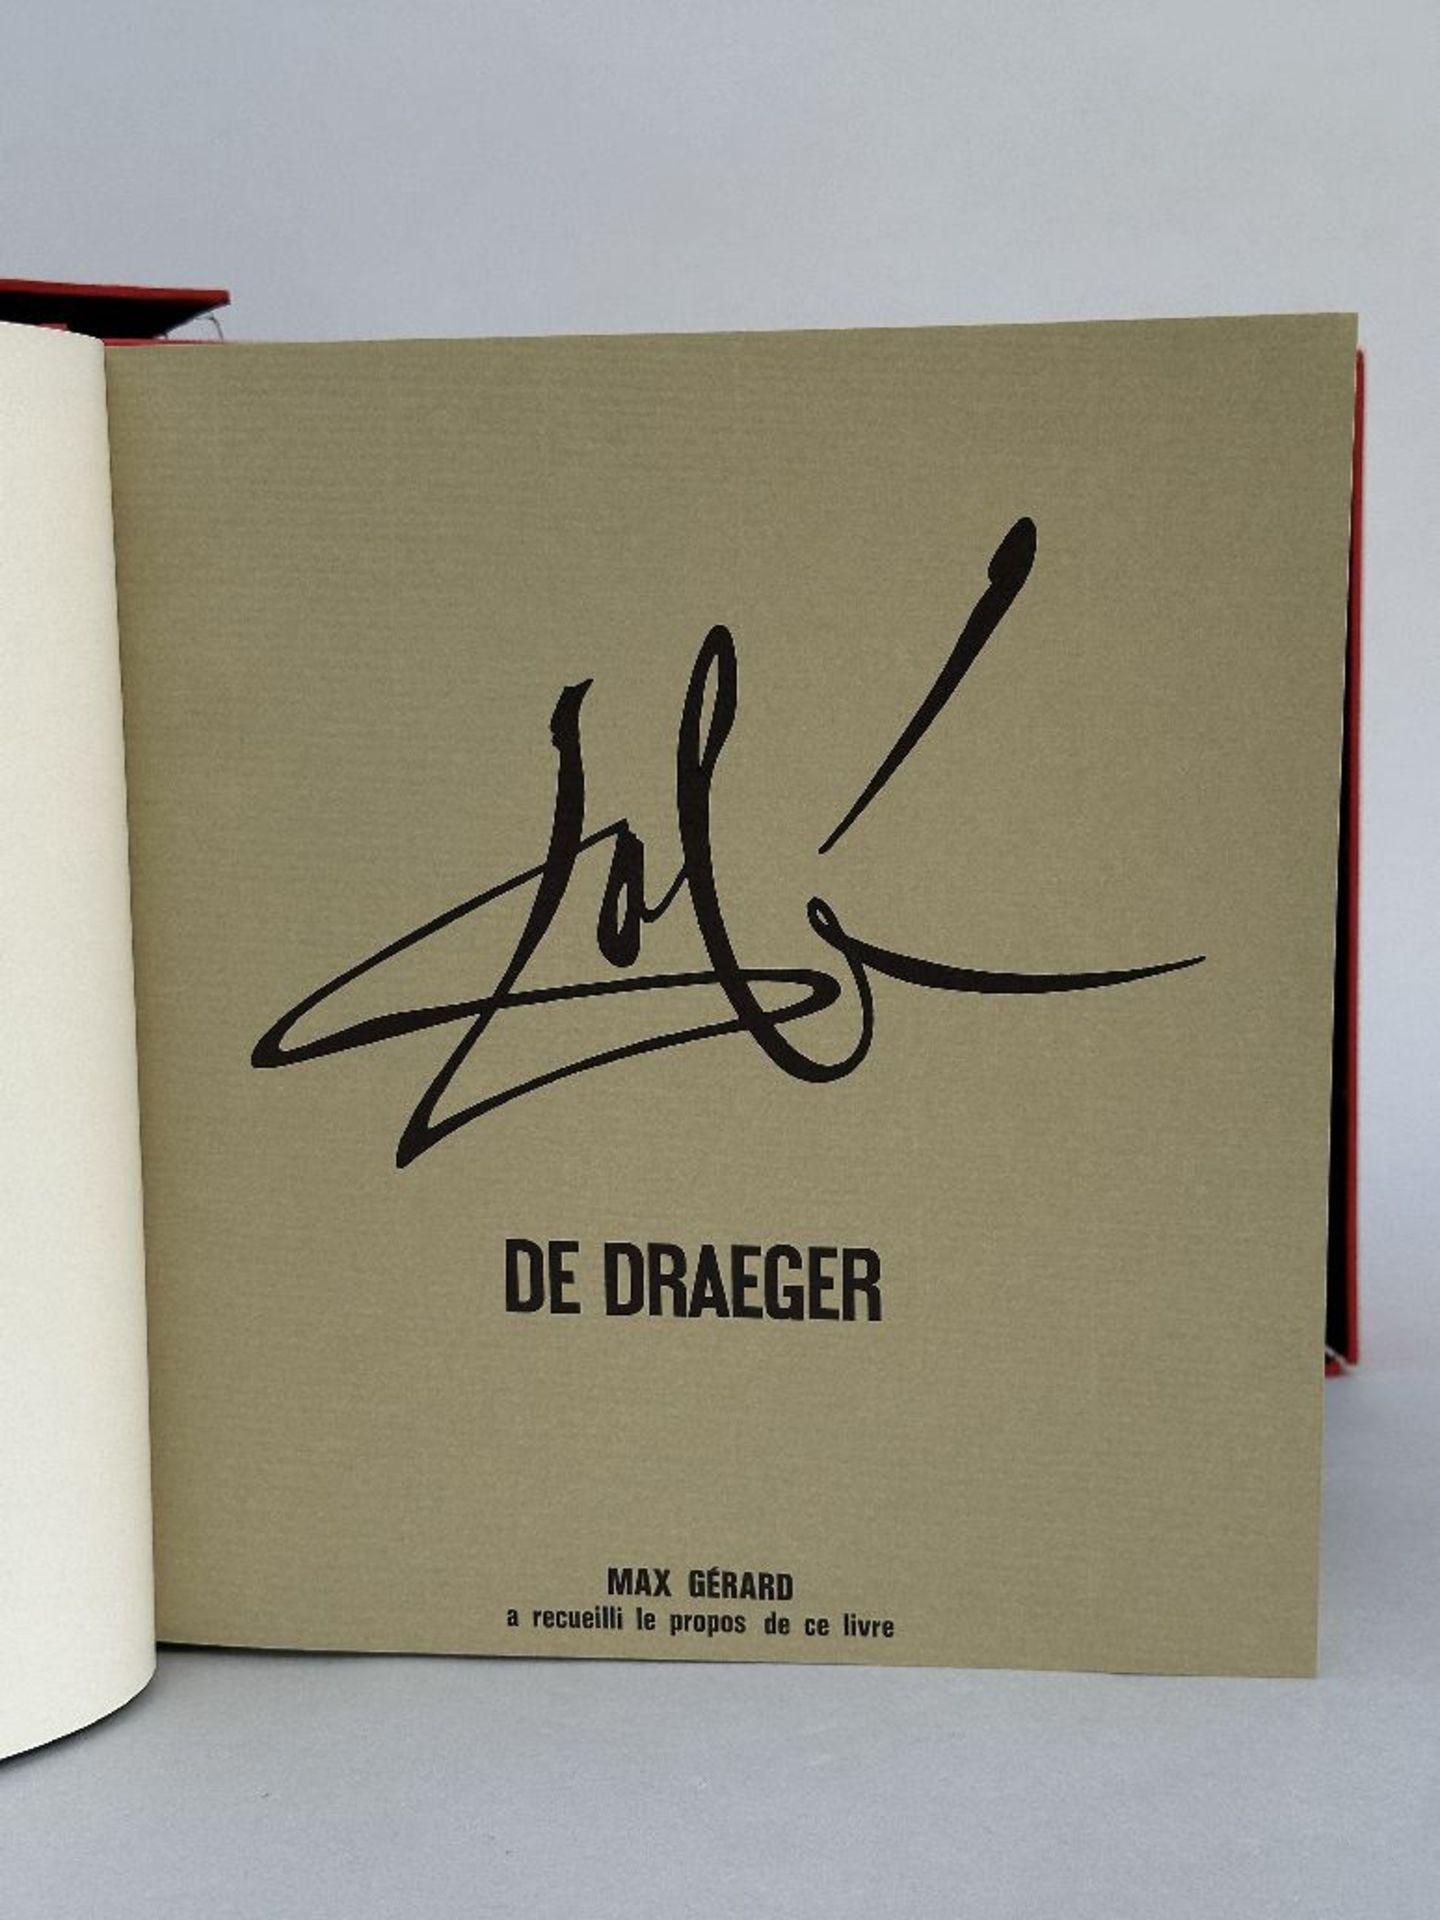 Salvador Dalí: 'The Draeger' book with bronzen medal and posters No. 244 - Image 8 of 9